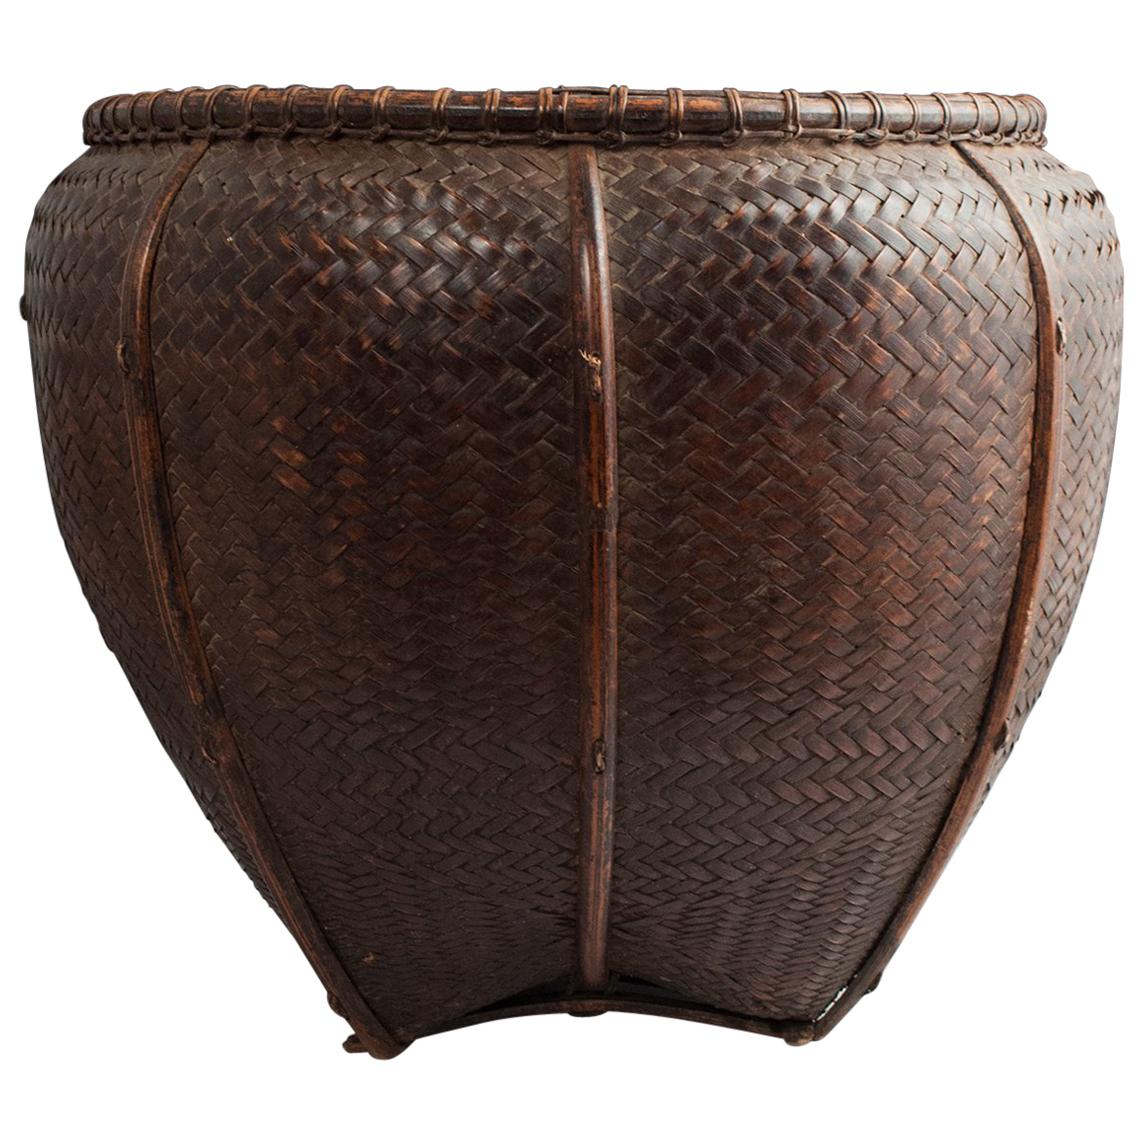 Early to Mid-20th Century Tribal Bamboo Collecting Basket, Attapeu Area, Laos